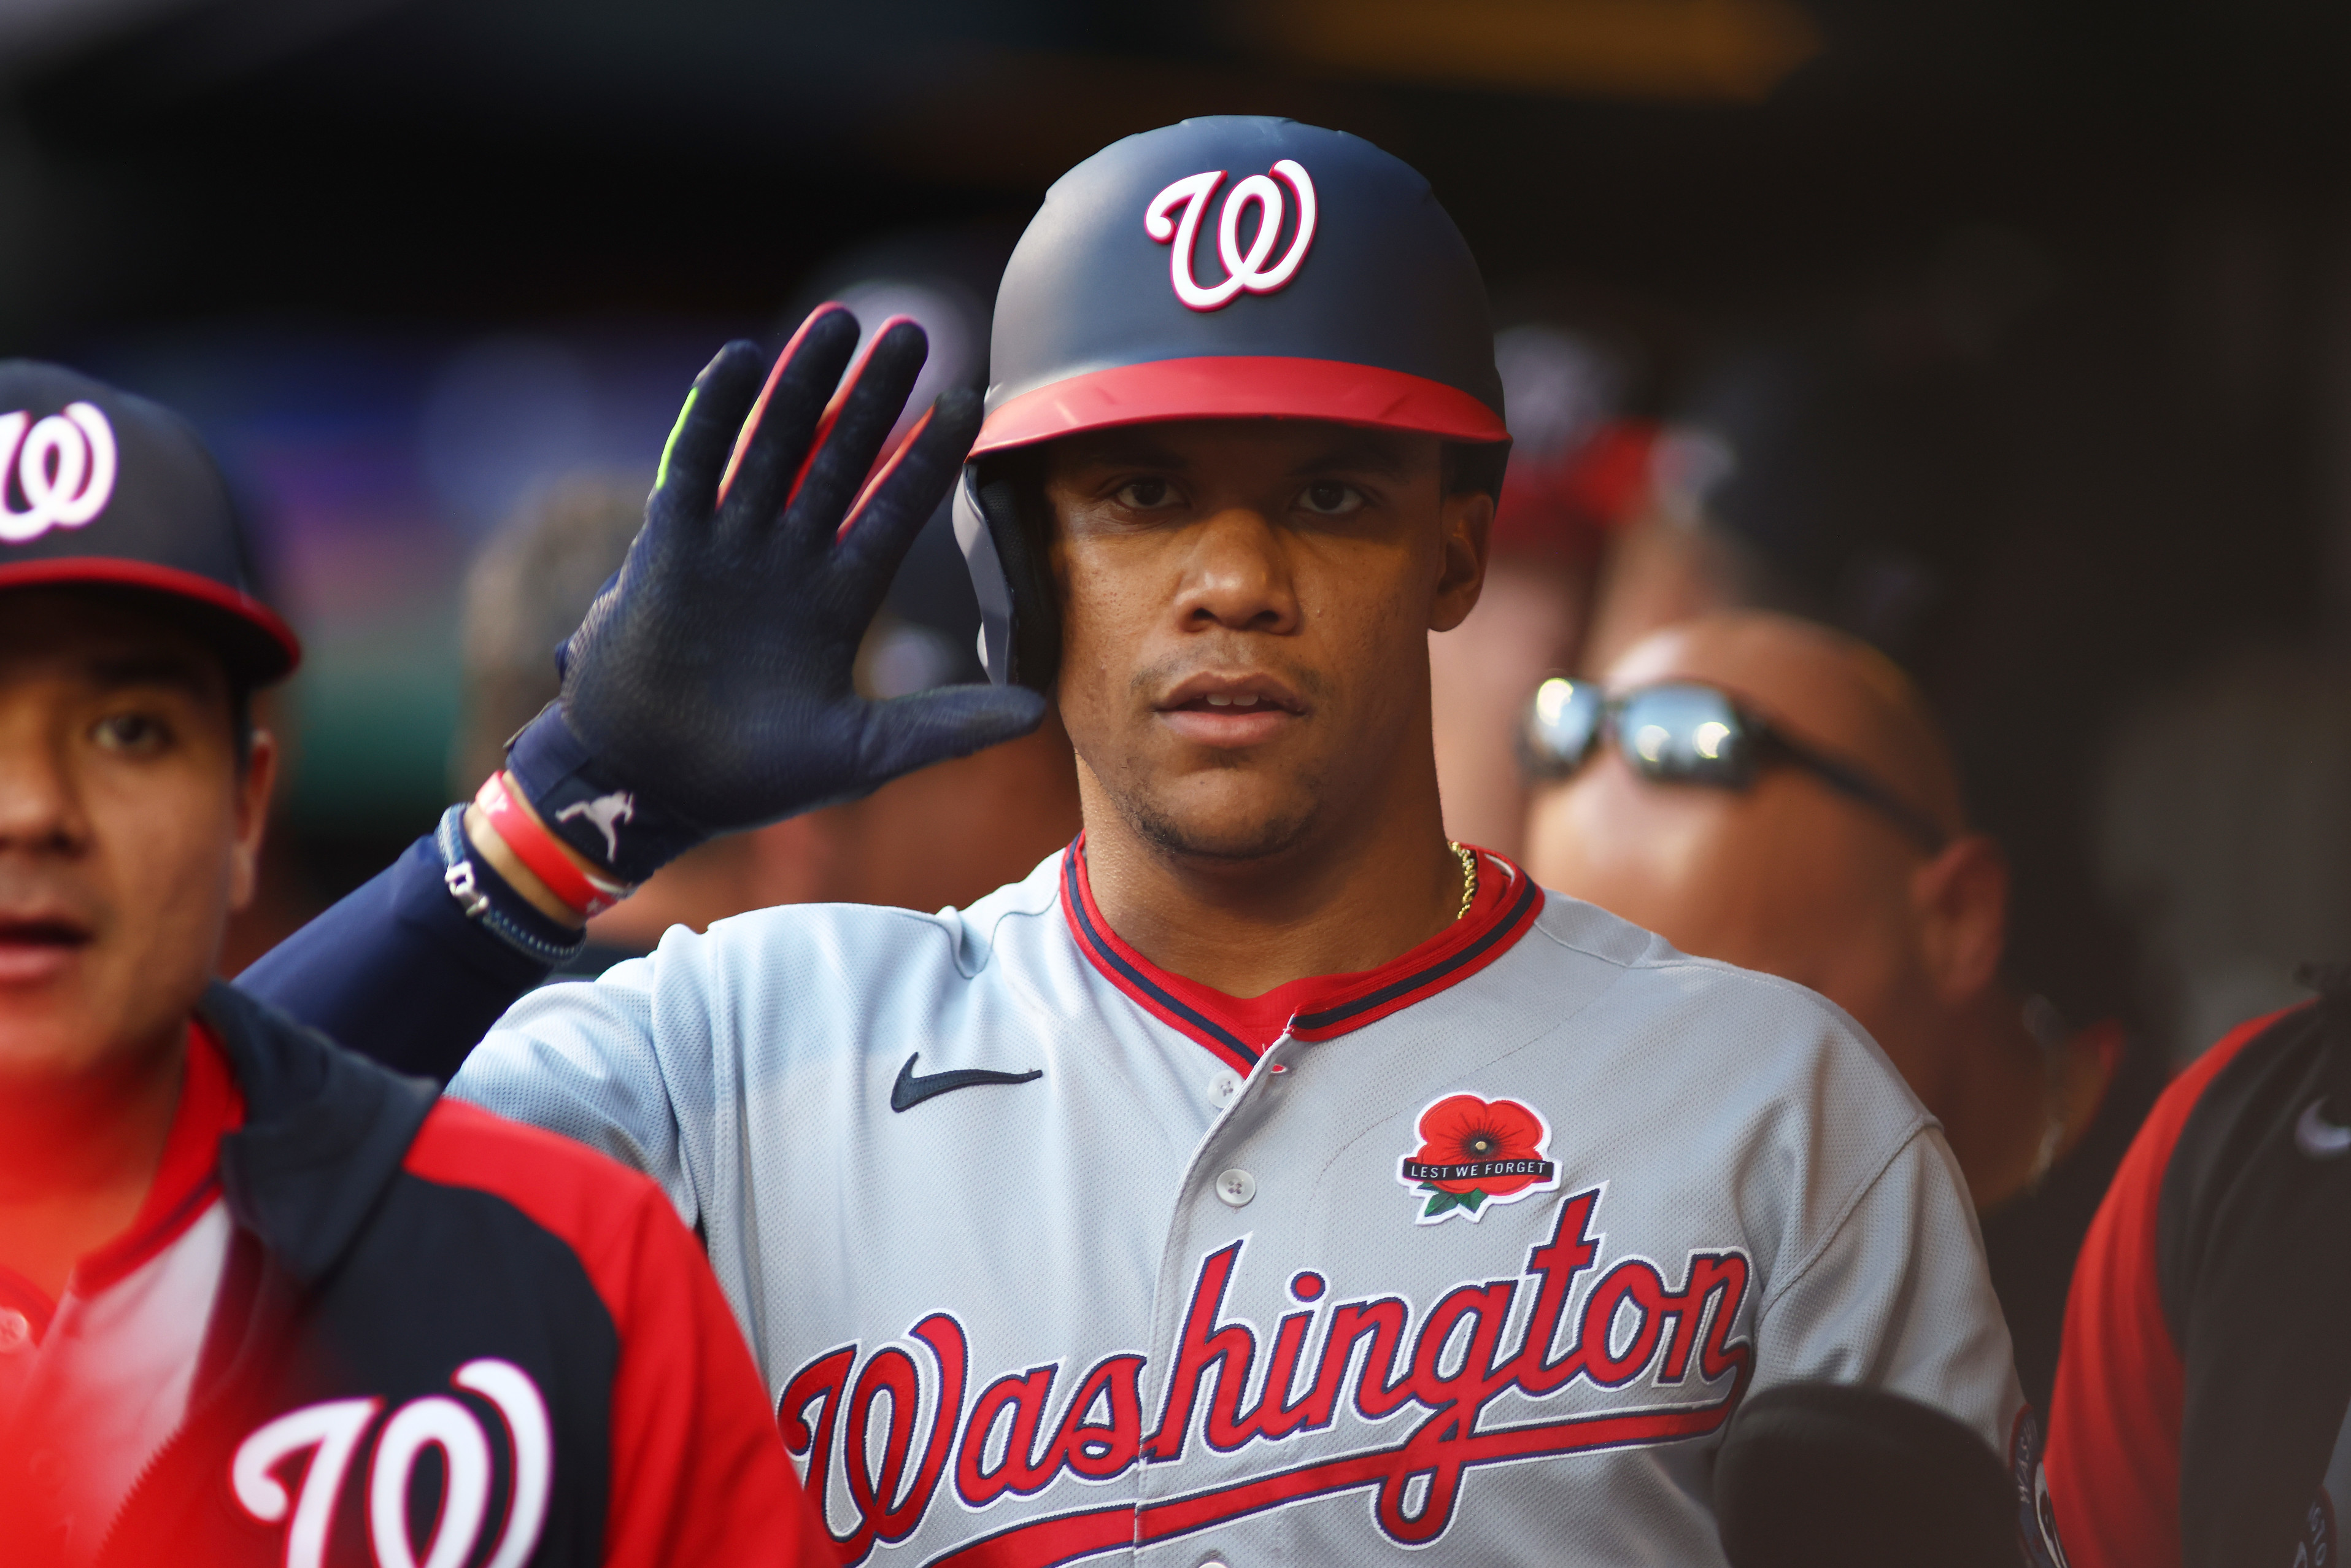 WATCH: Nationals GM Rizzo explains trading Juan Soto, Josh Bell to